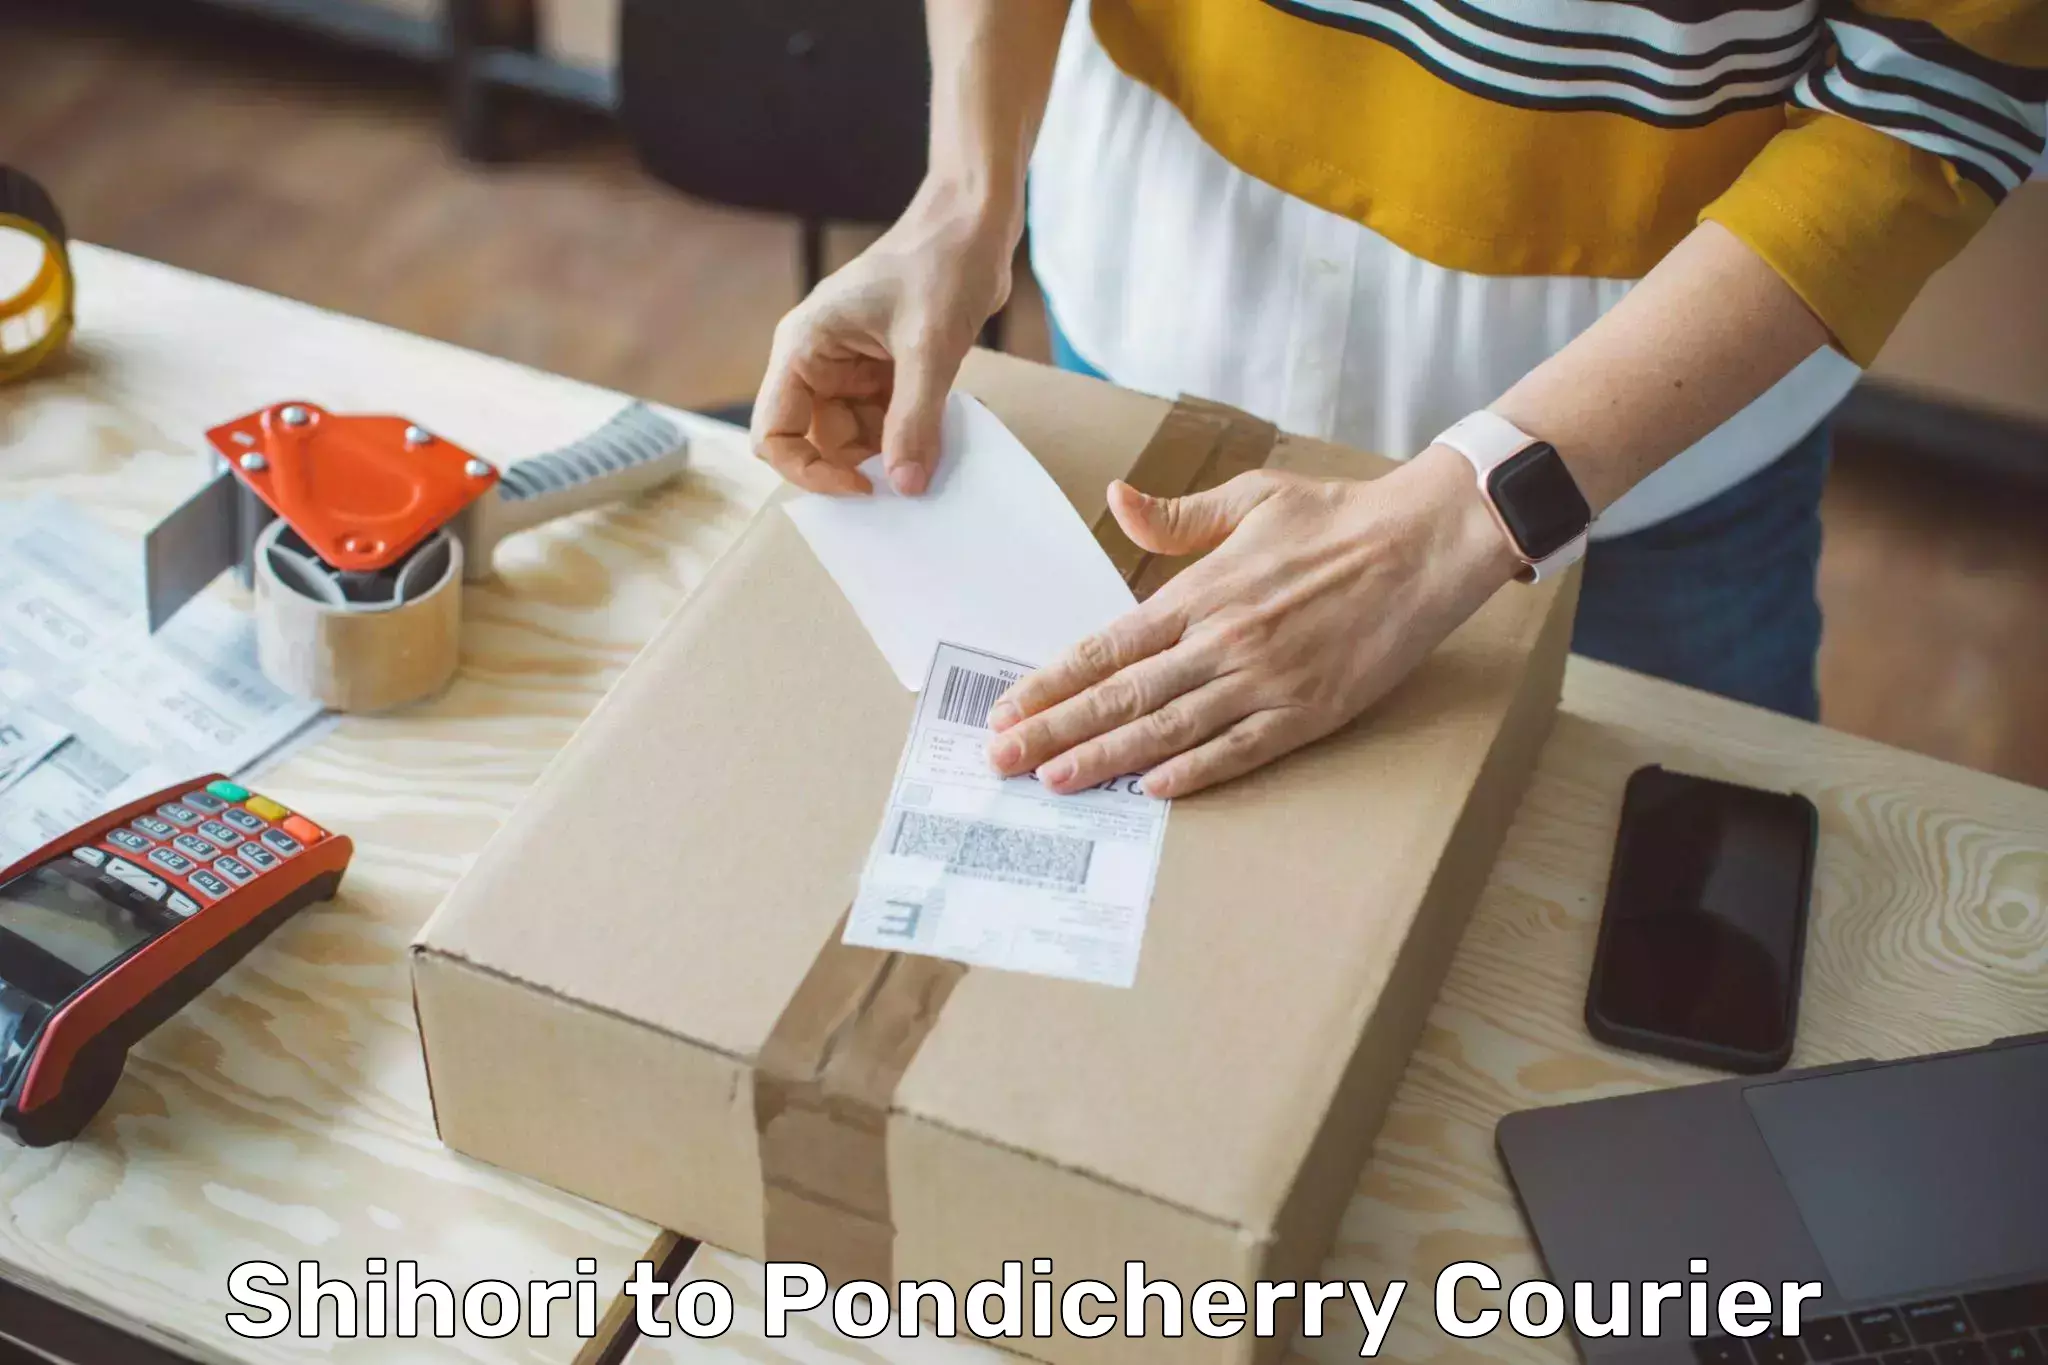 Efficient courier operations Shihori to Pondicherry University